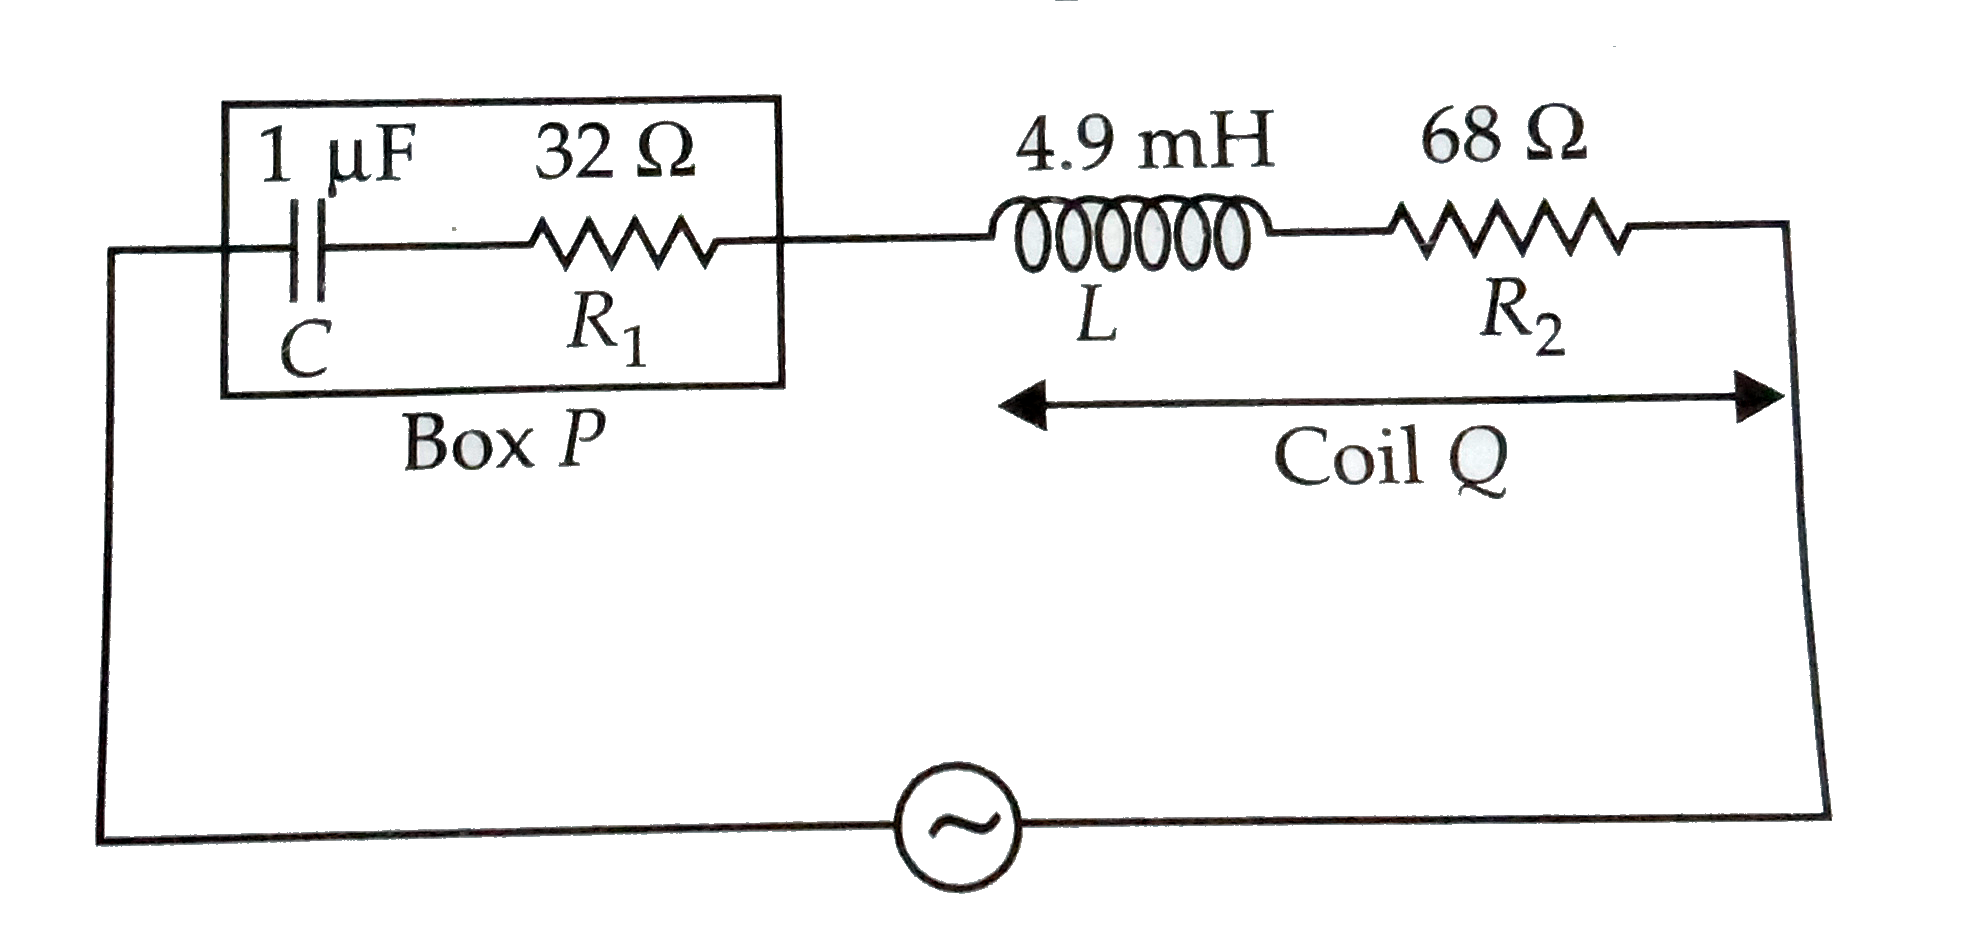 A box P and a coil Q are connected in series with an  ac source of variable frequency. The emf of source is constant at 10 V. Box P contains a capacitance of 1mu F in series with a resistance of 32 Omega. Coil Q has self inductance 4.9mH and  a resistance 68 Omega in series. The frequency is adjusted so that the maximum current flows in P and Q . At this frequency the voltage across P and Q respectively